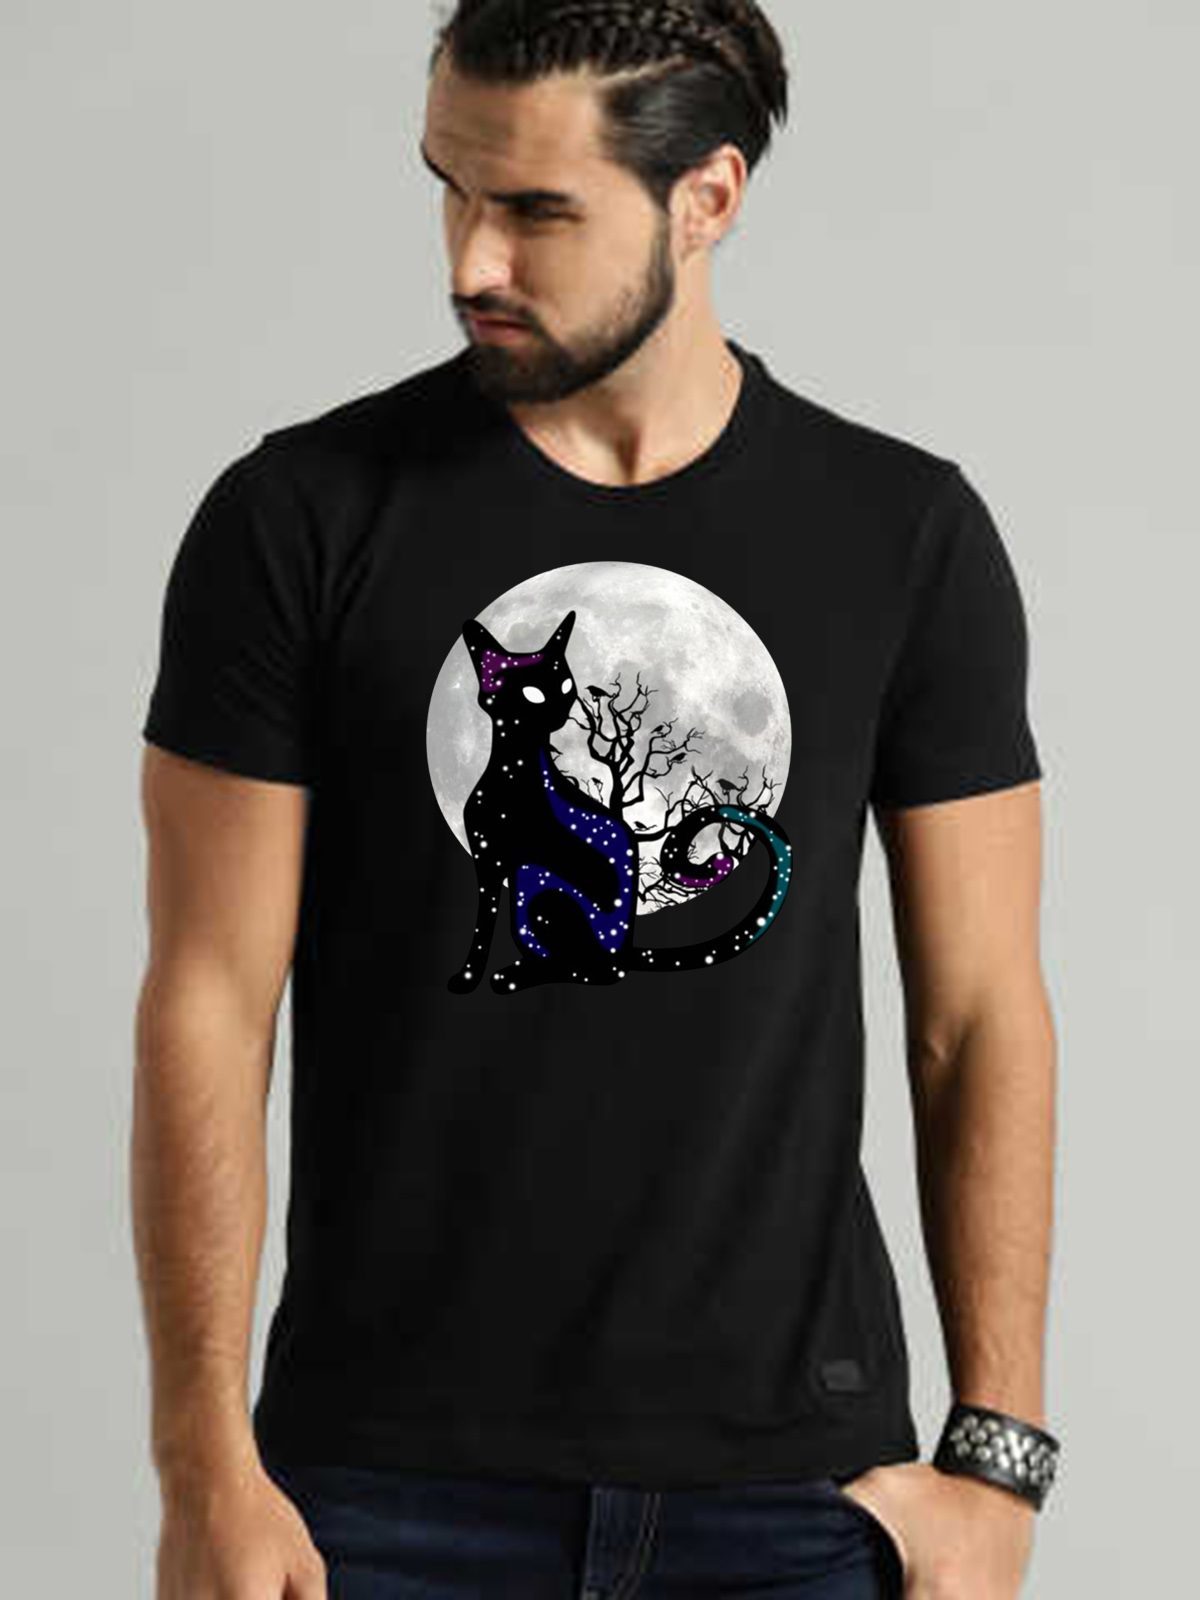 Halloween Cat Scary Black Cat Gothic Looking Halloween T-Shirt ...